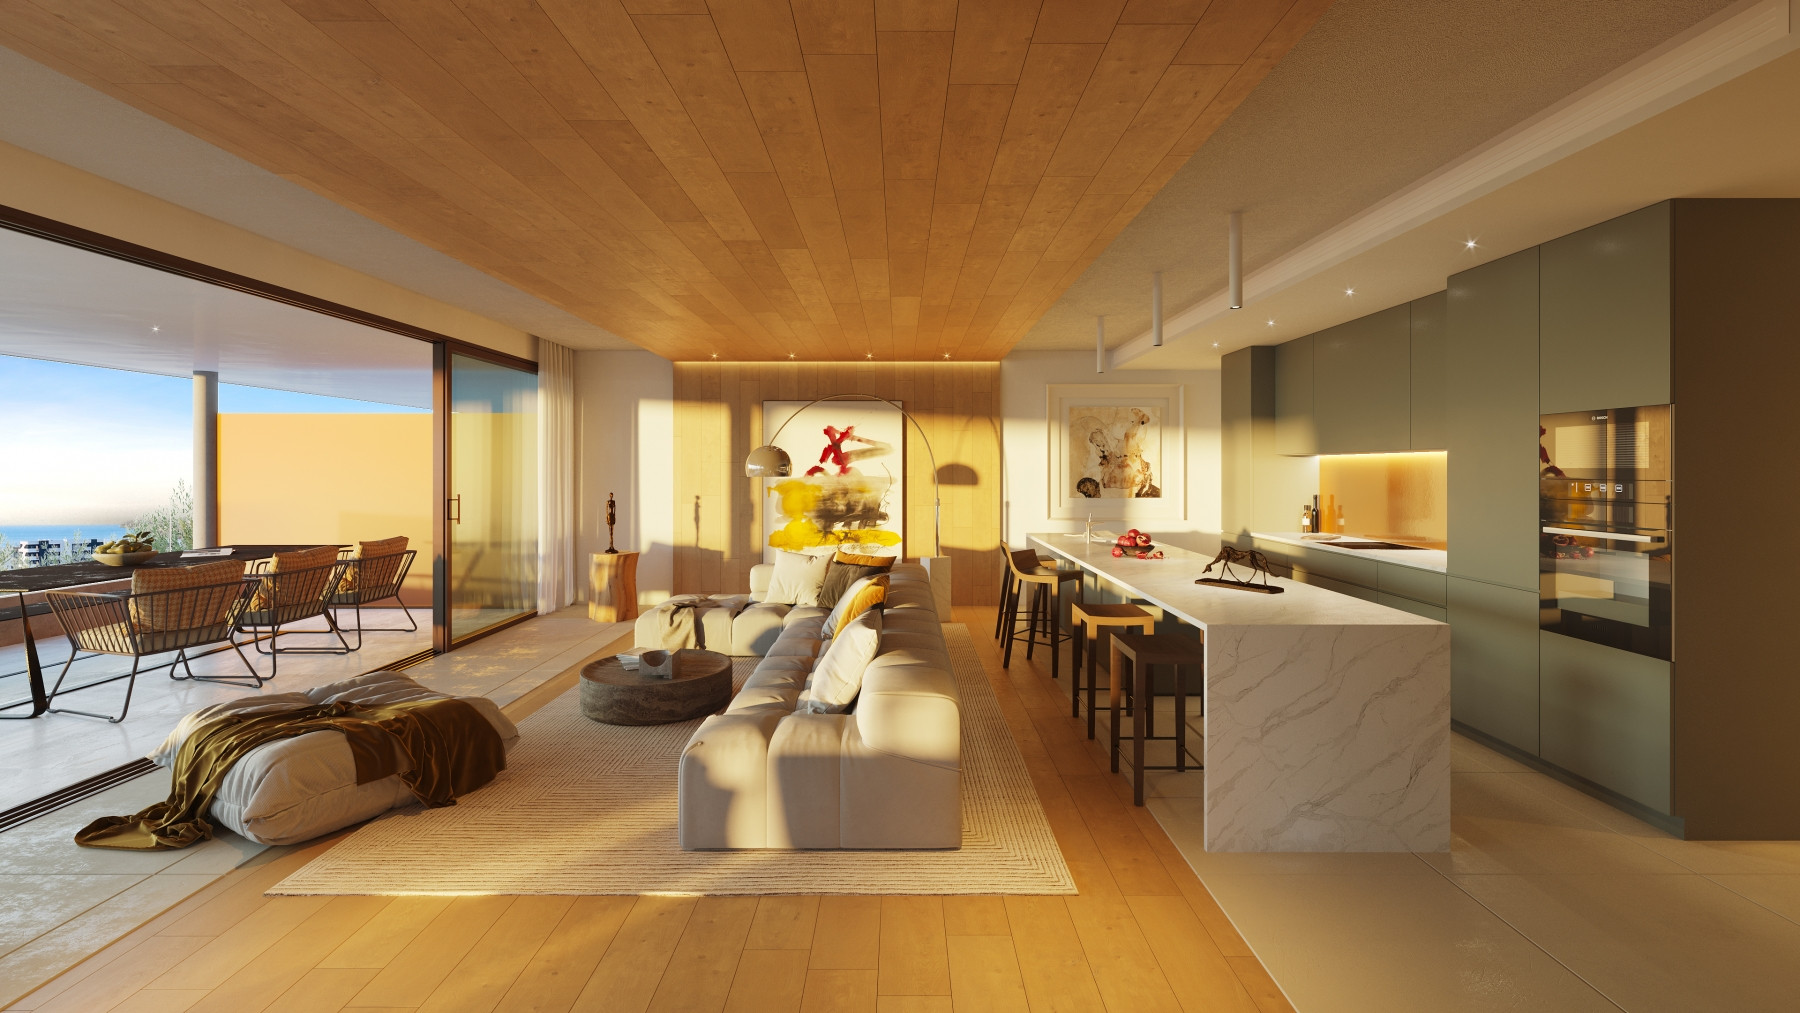 Higuerón South Residences: Luxury residential project located in El Higueron, Fuengirola. | Image 3